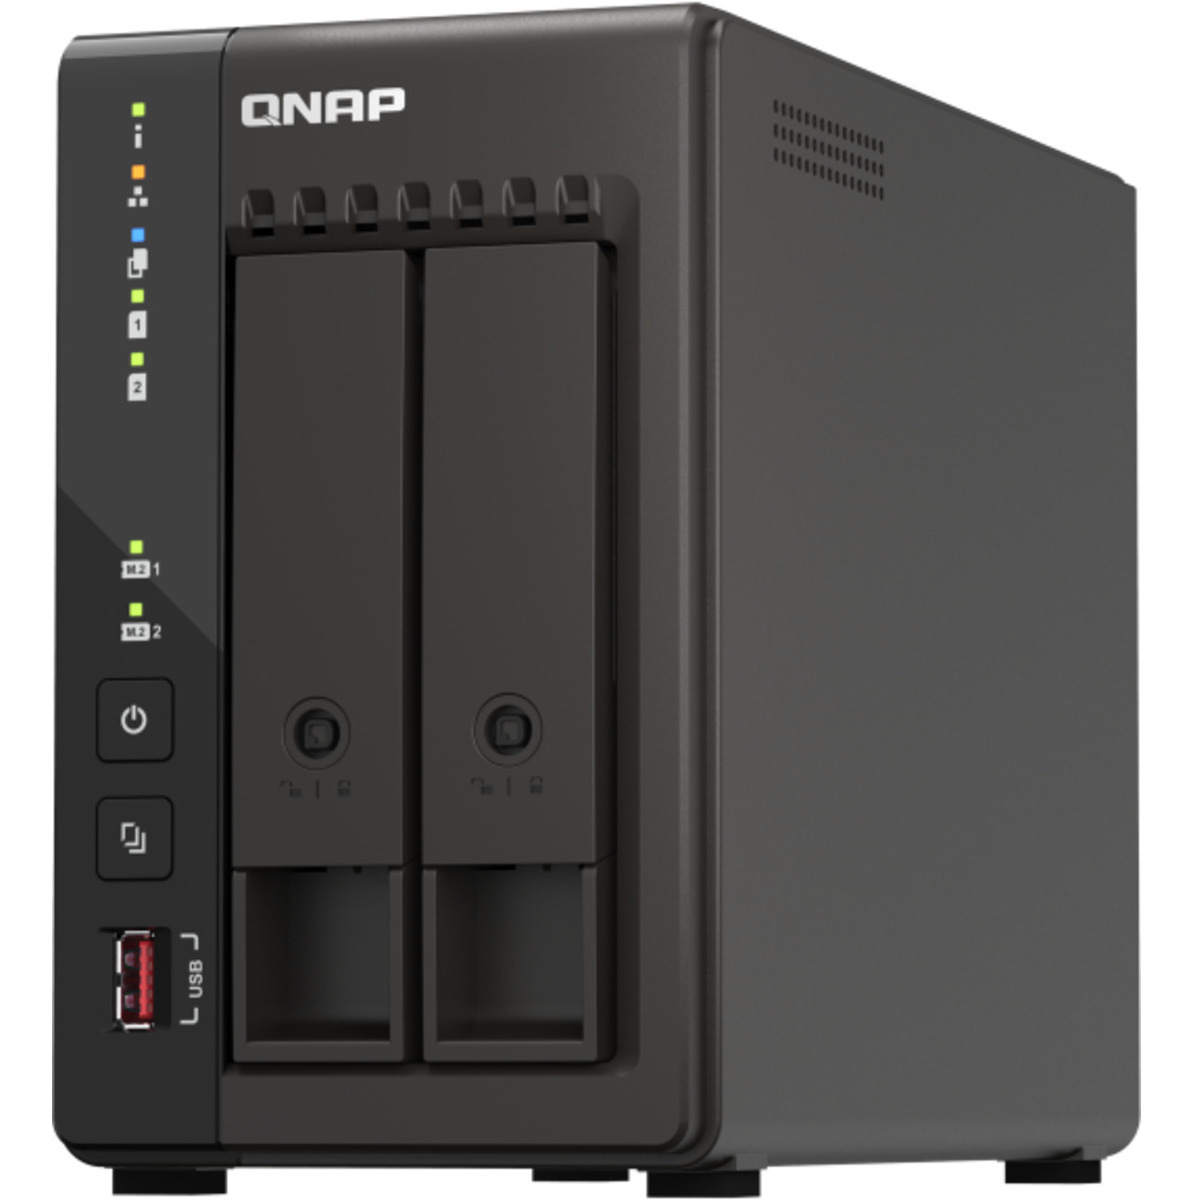 buy QNAP TS-253E 8tb Desktop NAS - Network Attached Storage Device 2x4000gb Toshiba MN Series MN08ADA400E 3.5 7200rpm SATA 6Gb/s HDD NAS Class Drives Installed - Burn-In Tested - ON SALE - nas headquarters buy network attached storage server device das new raid-5 free shipping simply usa christmas holiday black friday cyber monday week sale happening now! TS-253E